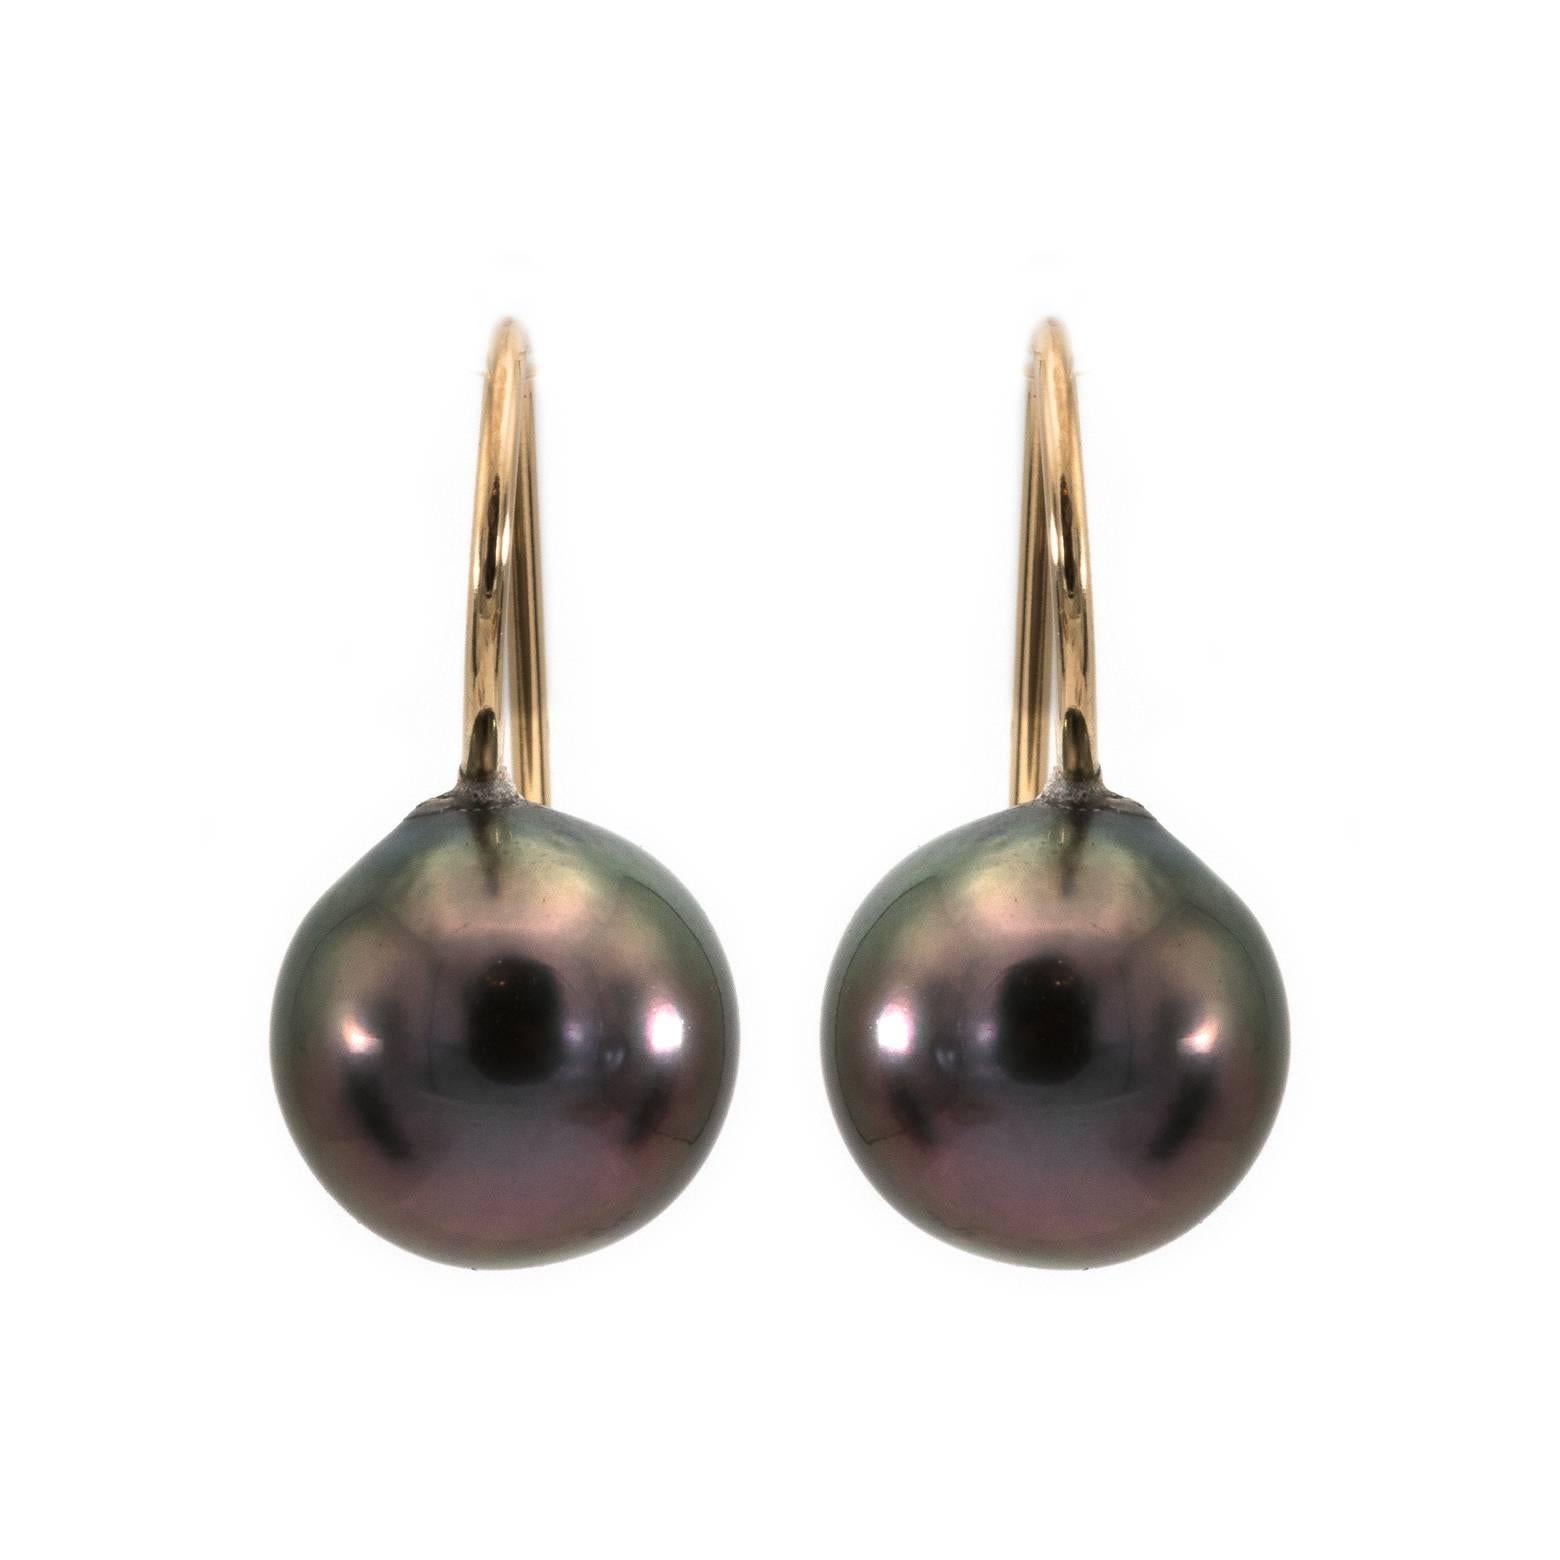 These stunning deep blue Tahitian pearl earrings are the perfect pair to wear every day. The 18k gold wire is looped around to anchor the pearl just a tad below the earlobe for the full vision of these beautifully matched pearls. You will love them!!